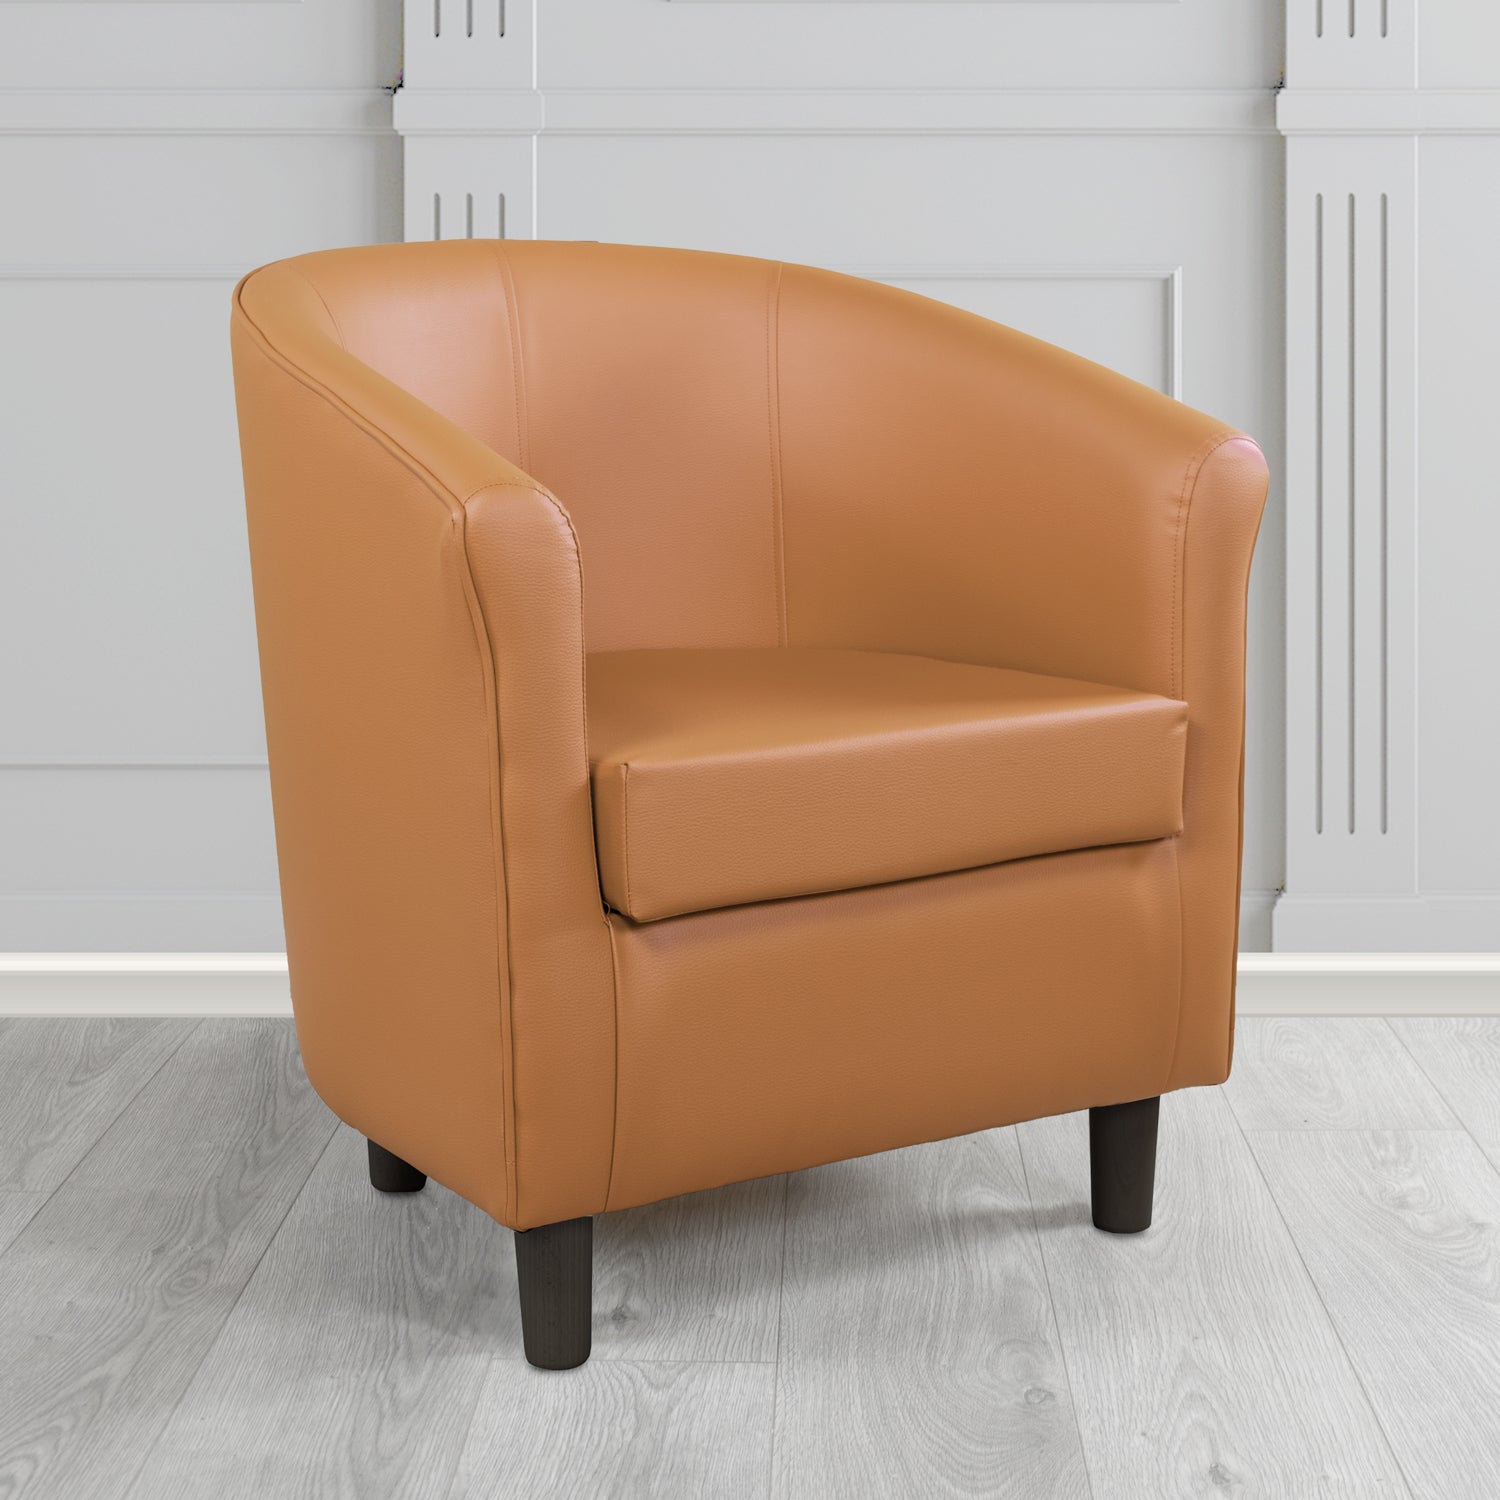 Tuscany Just Colour Fudge Antimicrobial Crib 5 Contract Faux Leather Tub Chair - The Tub Chair Shop